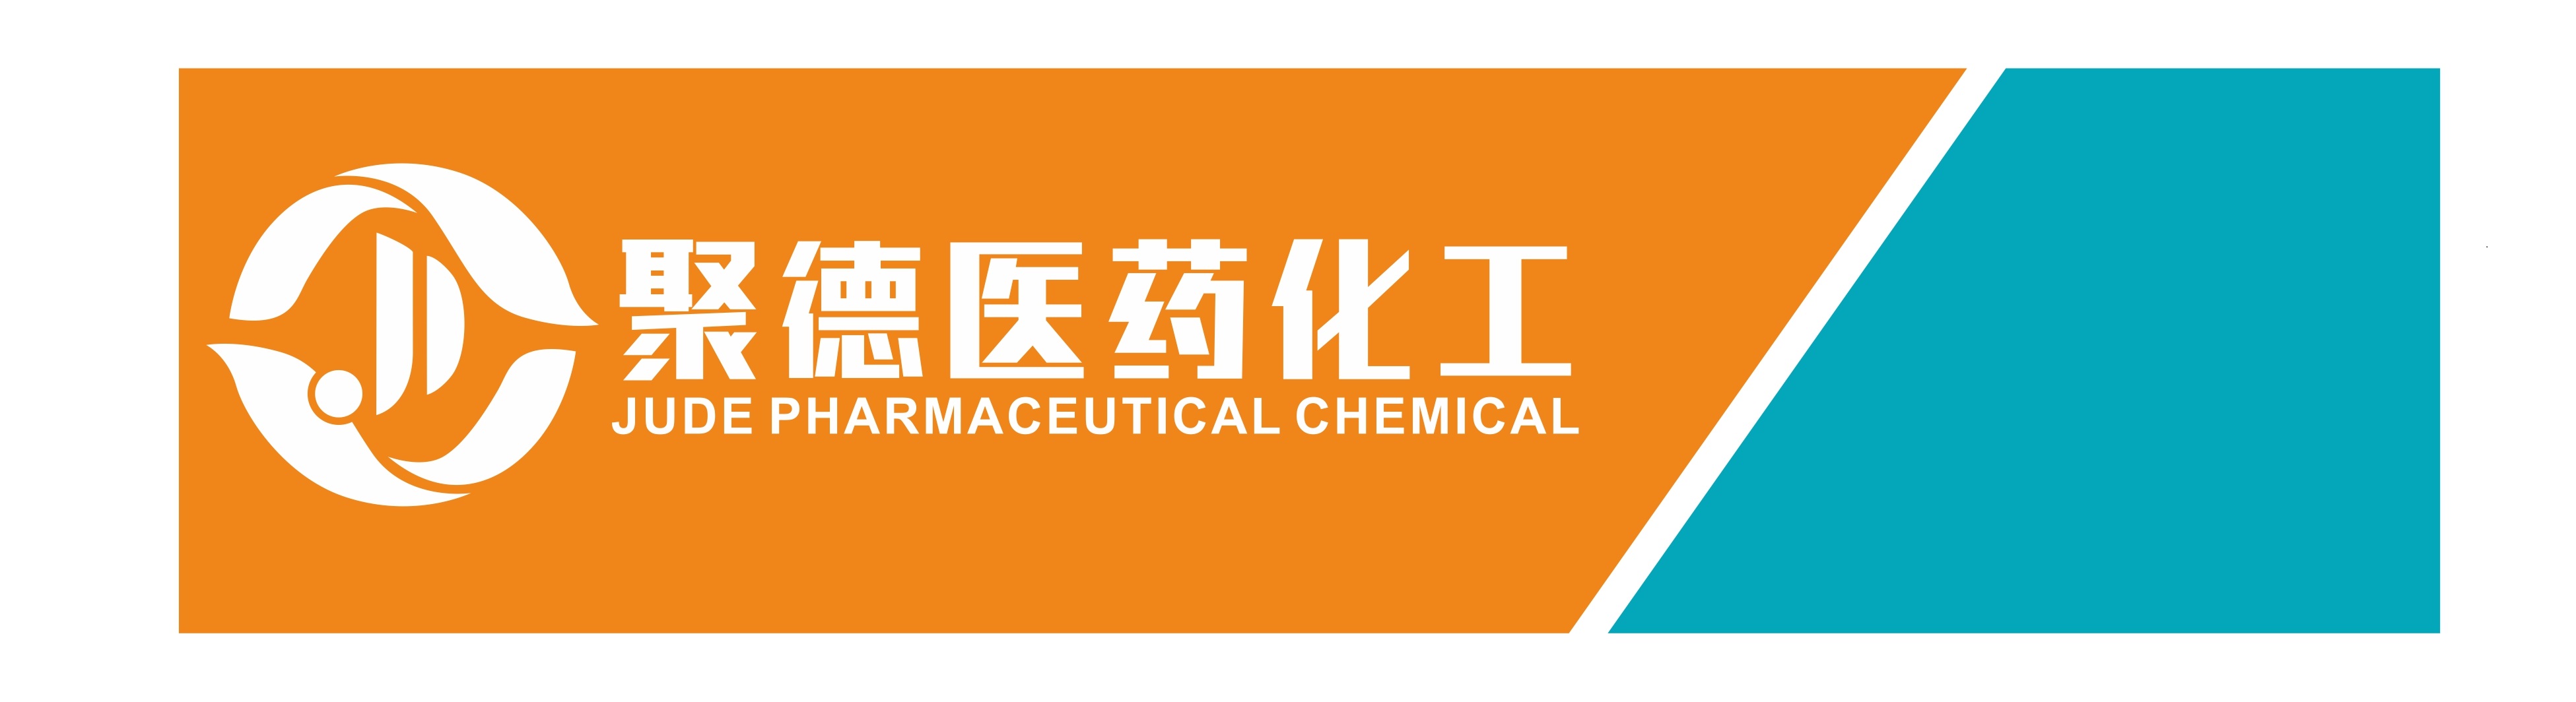 LIANYUNGANG JUDE PHARMACEUTICAL CHEMICAL CO.,LTD.'s promotional picture